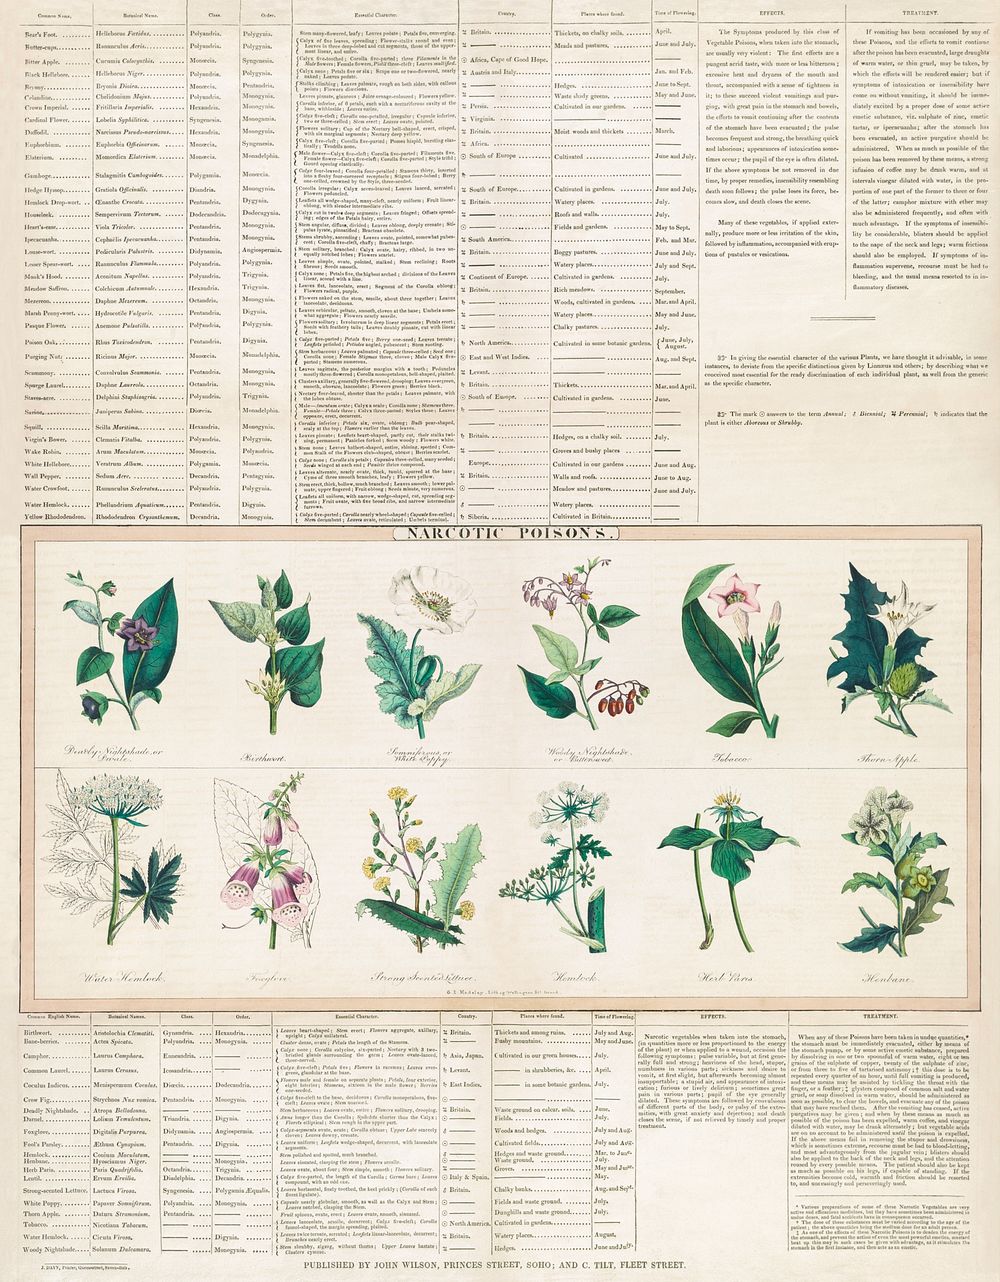 Narcotic poisons (1843) print in high resolution by George Edward Madeley. Original from Library of Congress. Digitally…